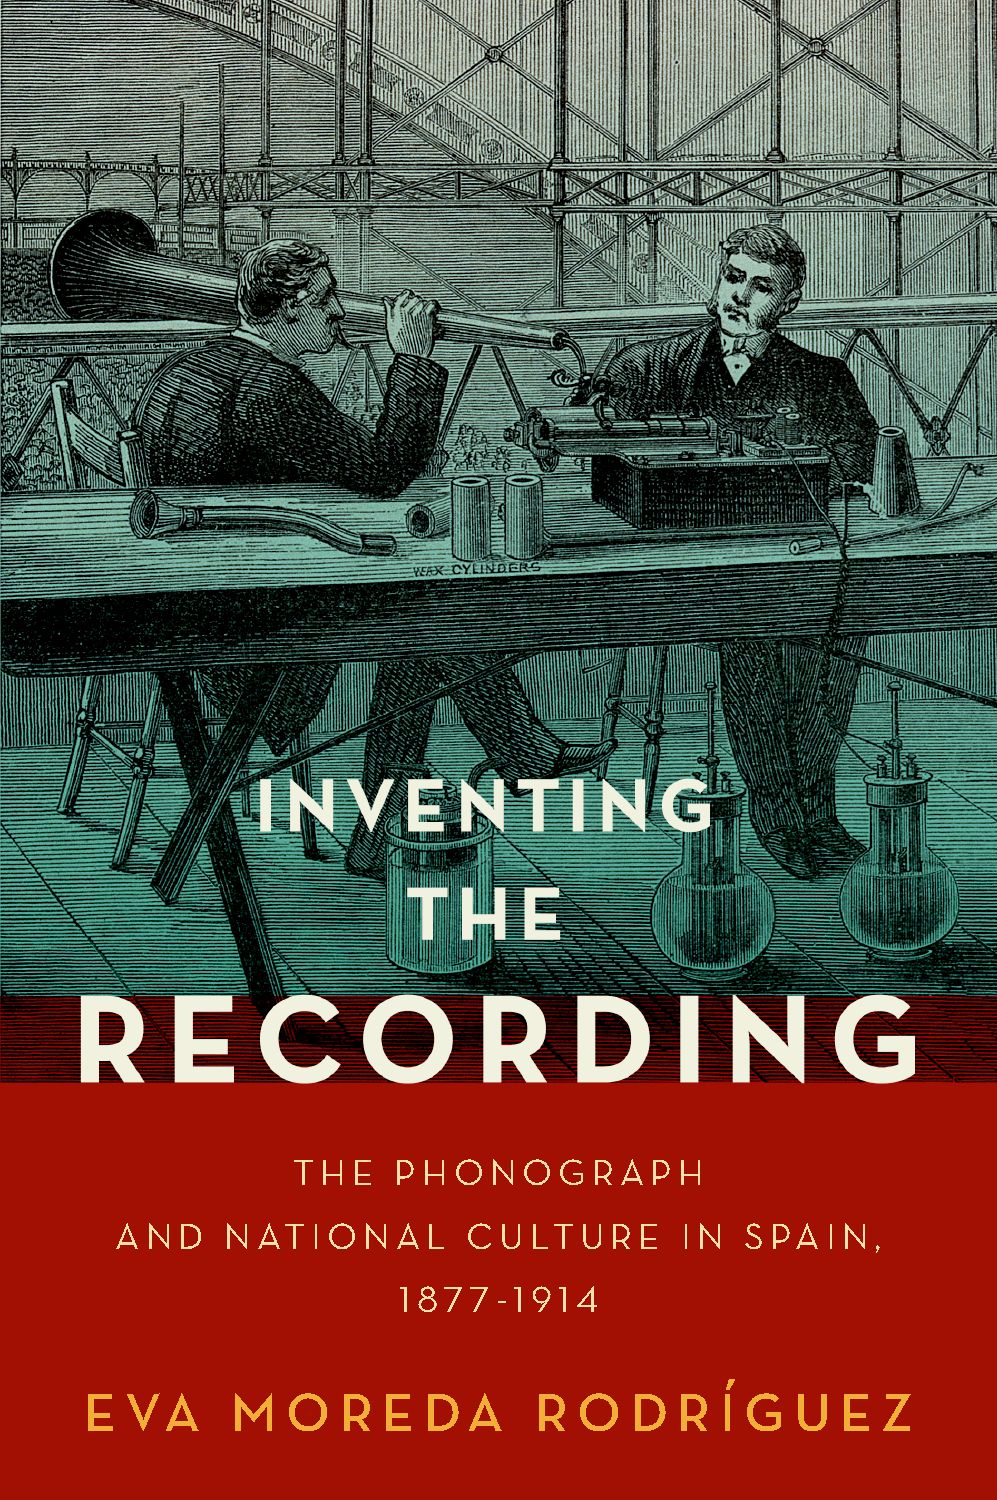 Inventing the Recording The Phonograph: History